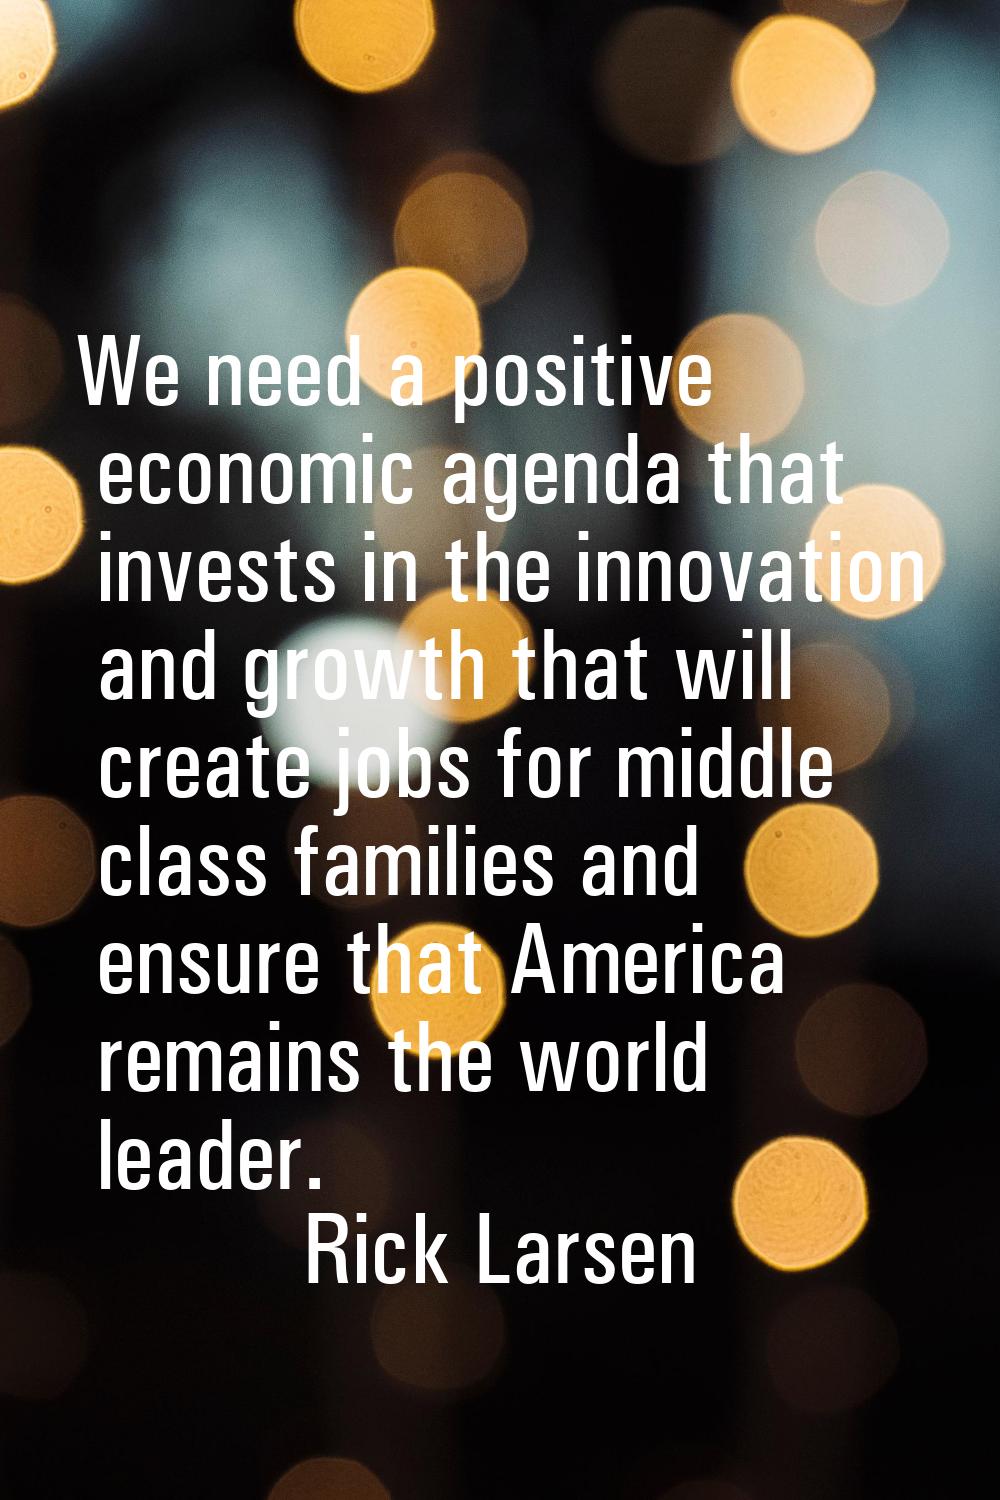 We need a positive economic agenda that invests in the innovation and growth that will create jobs 